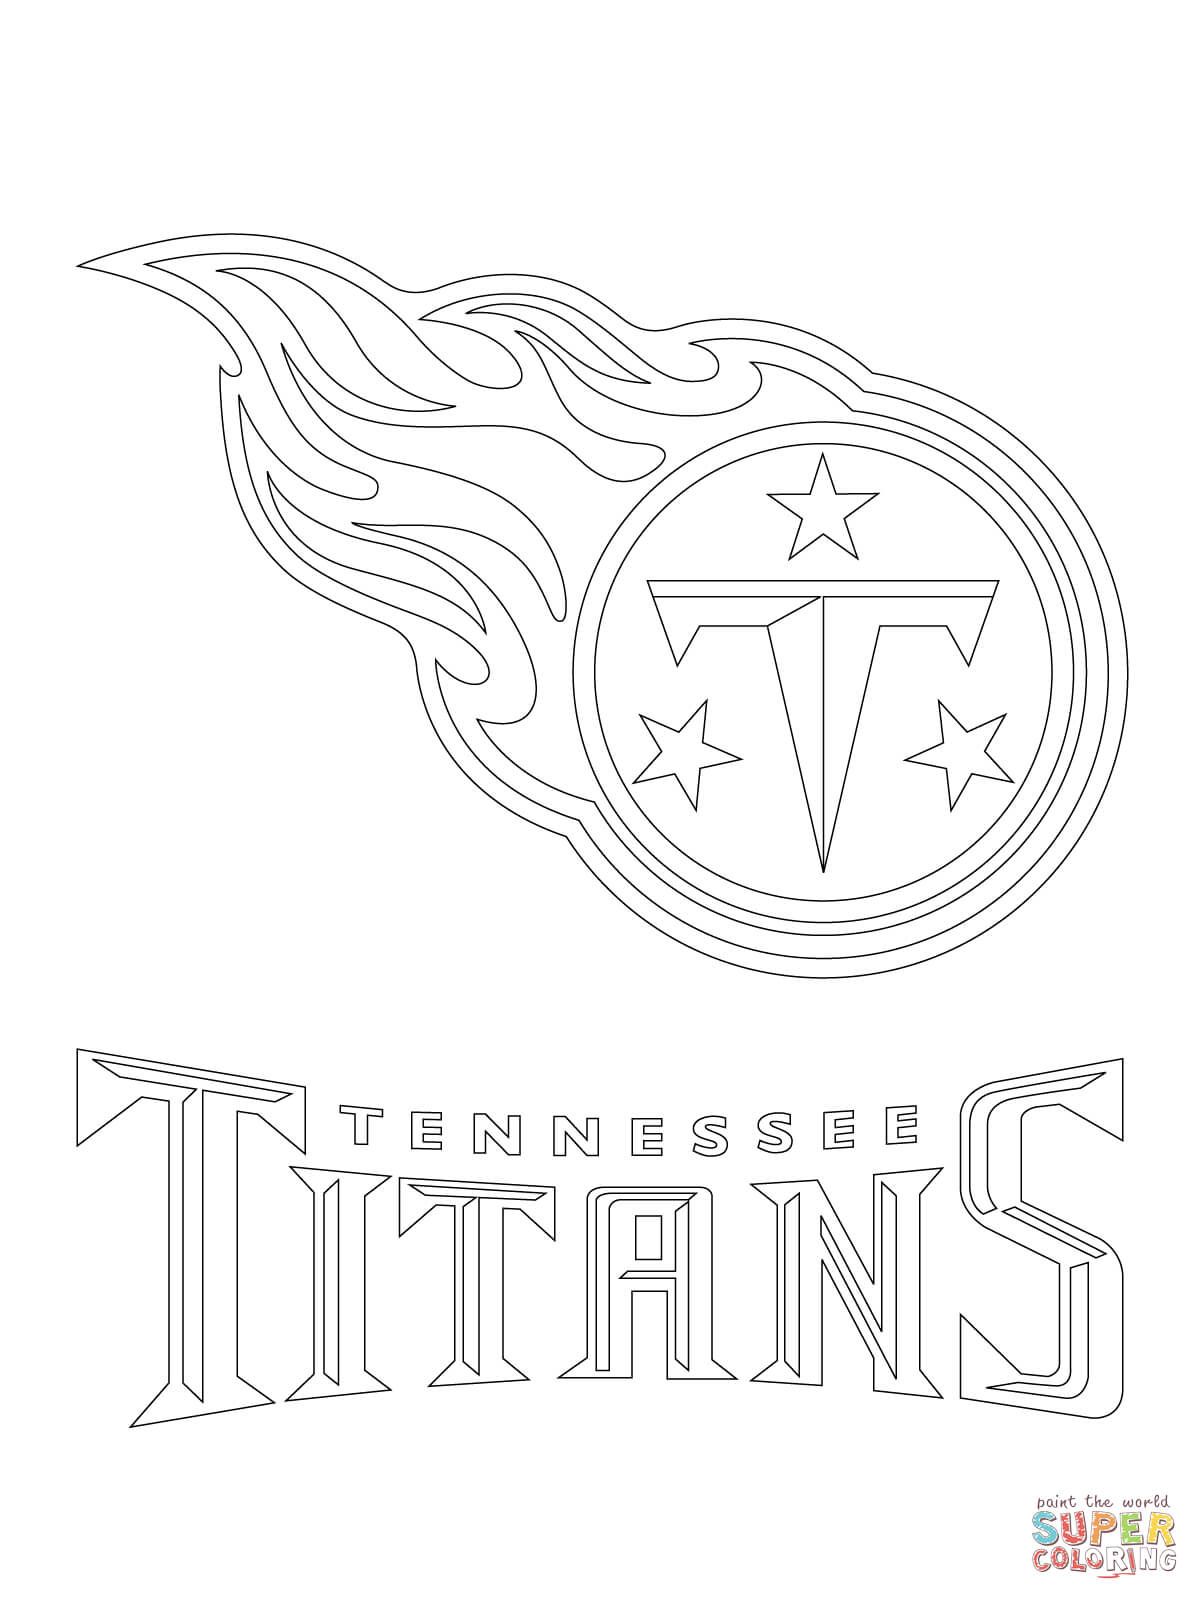 Tennessee Titans Logo coloring page | Free Printable Coloring Pages | Football  coloring pages, Coloring pages inspirational, Coloring pages